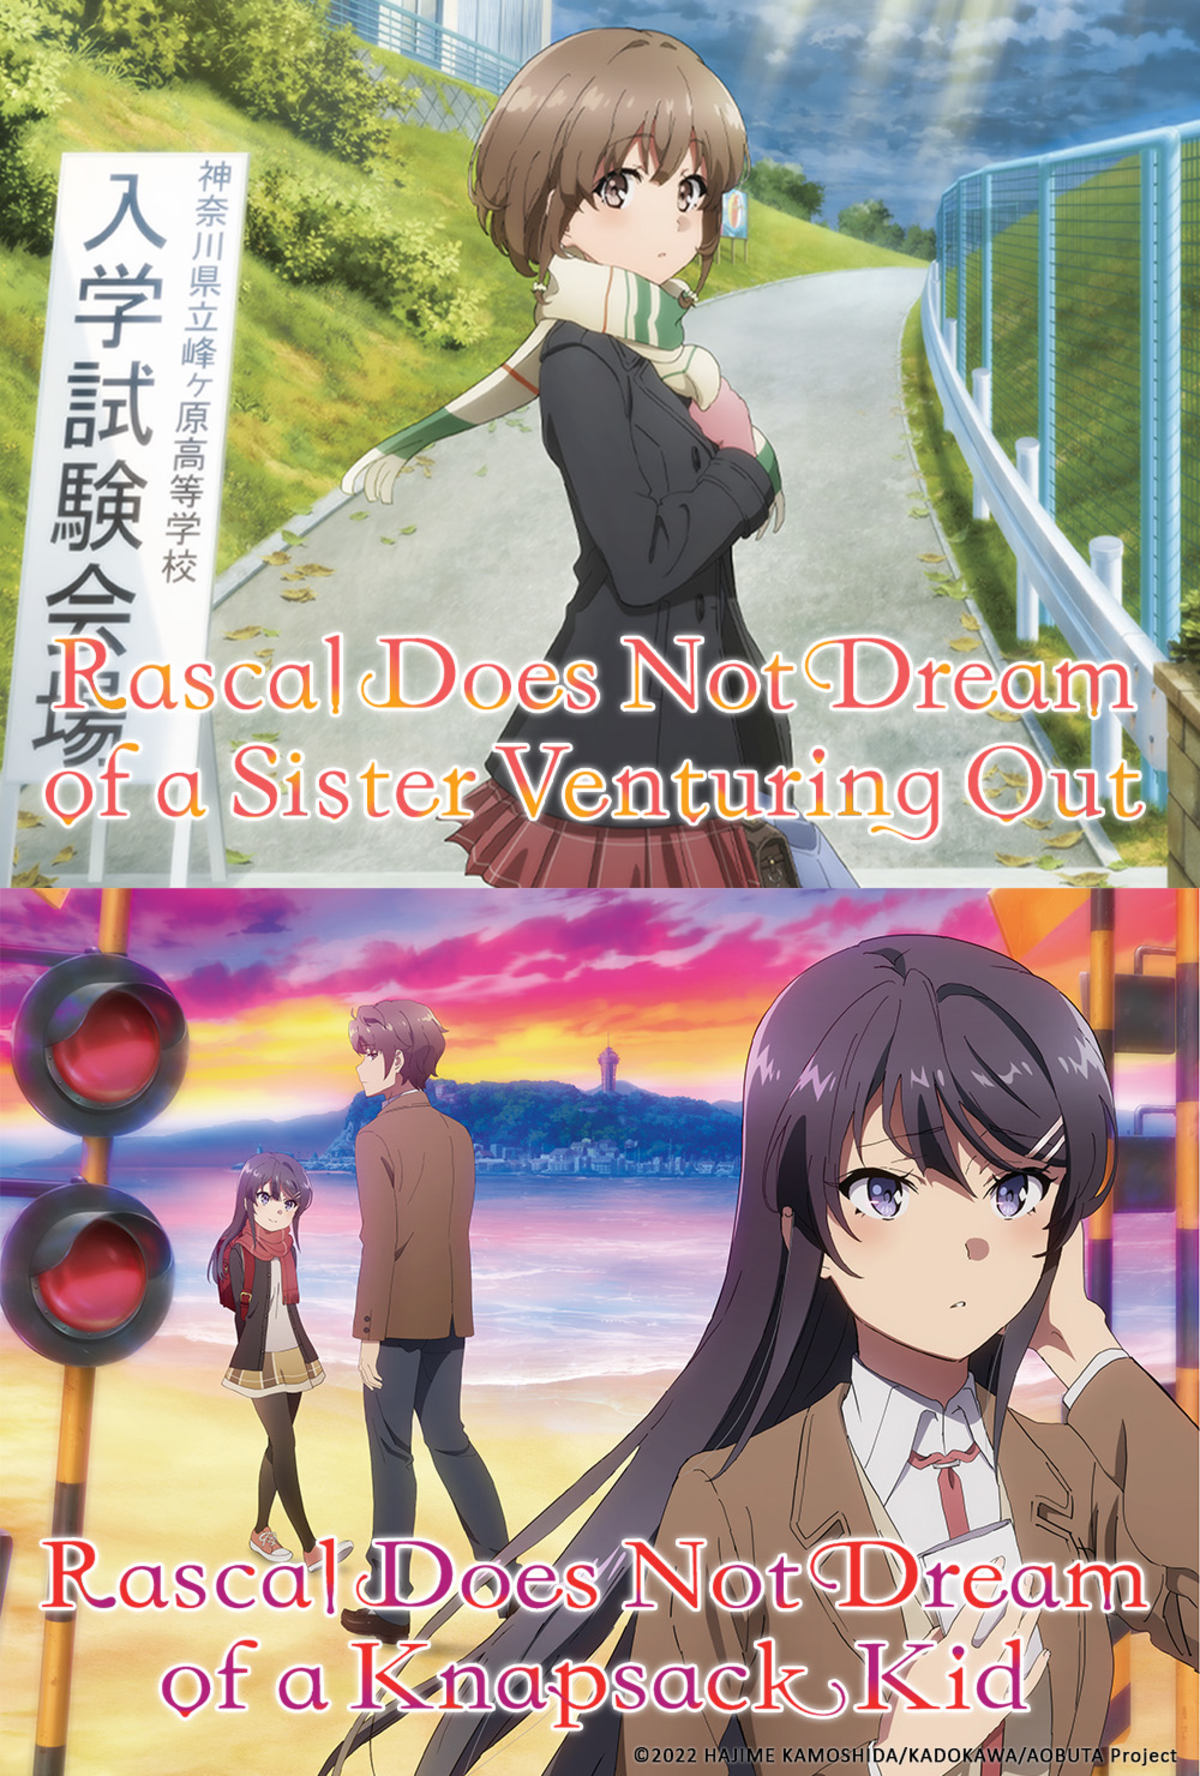 Rascal Does Not Dream (Double Feature)